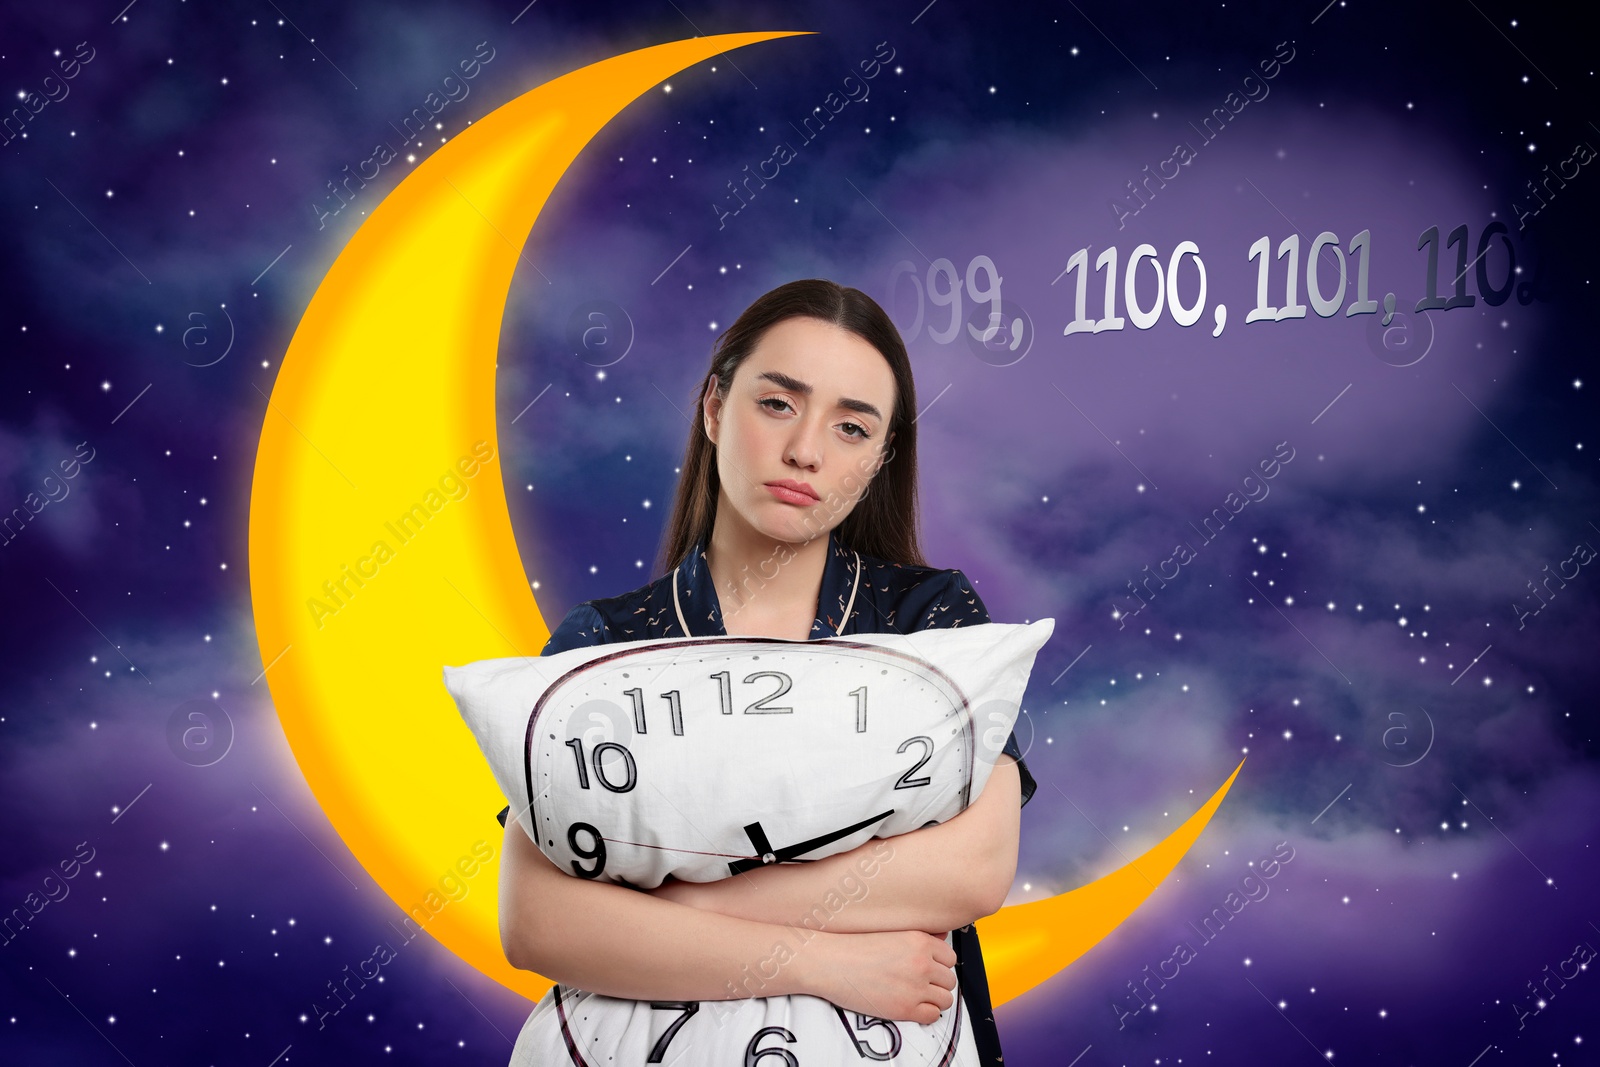 Image of Suffering from insomnia. Woman with pillow counting to fall asleep. Night sky with crescent moon, stars and numbers on background